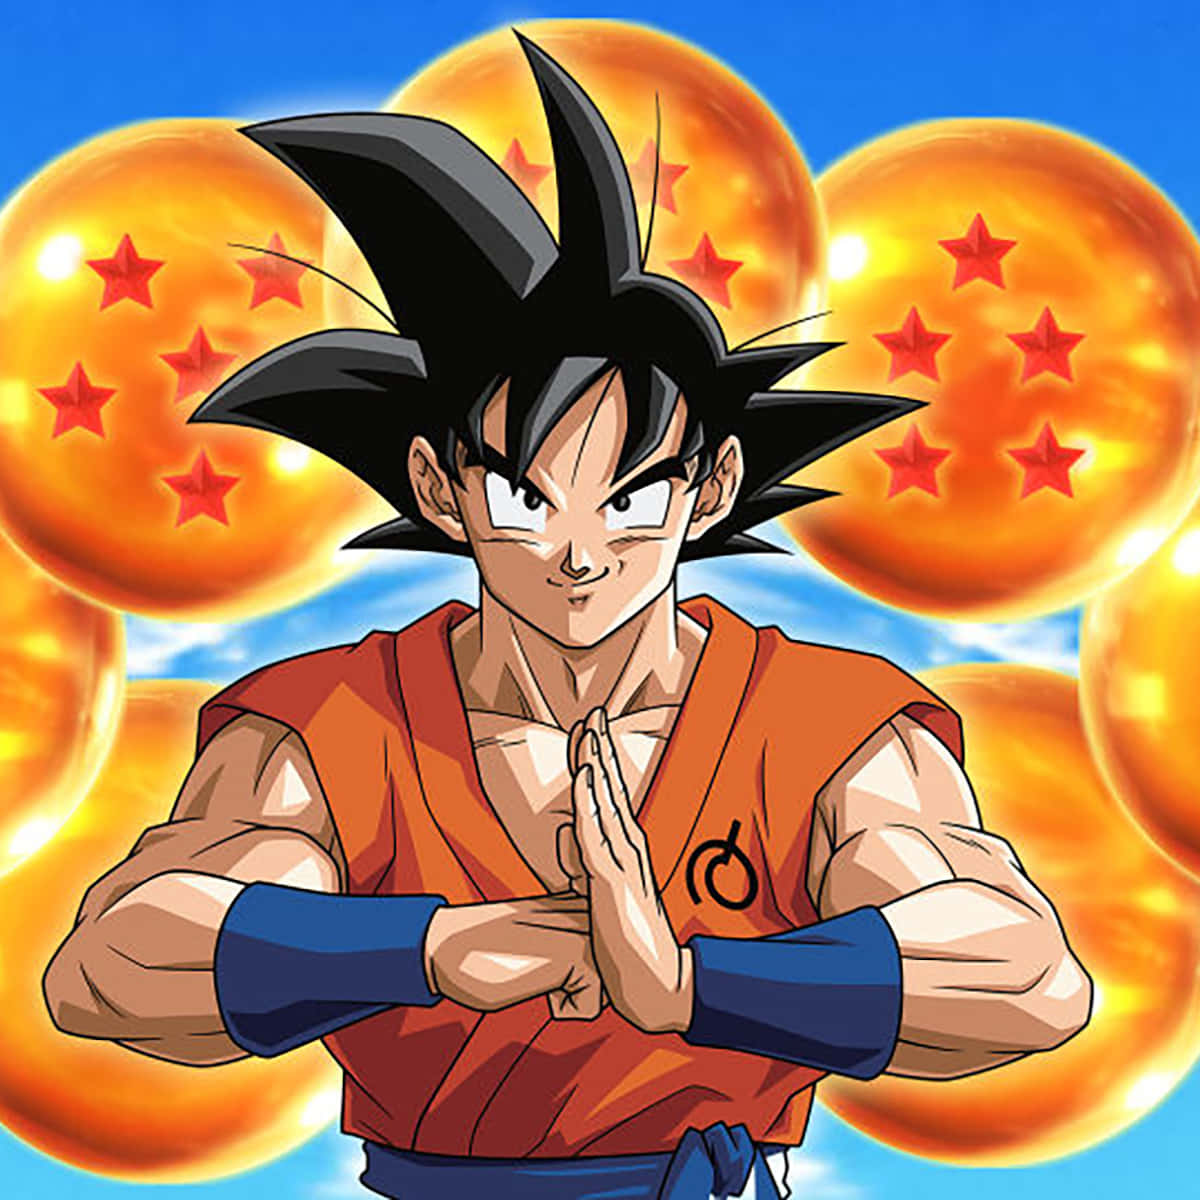 Unlock the power of your next adventure with Dragon Ball!